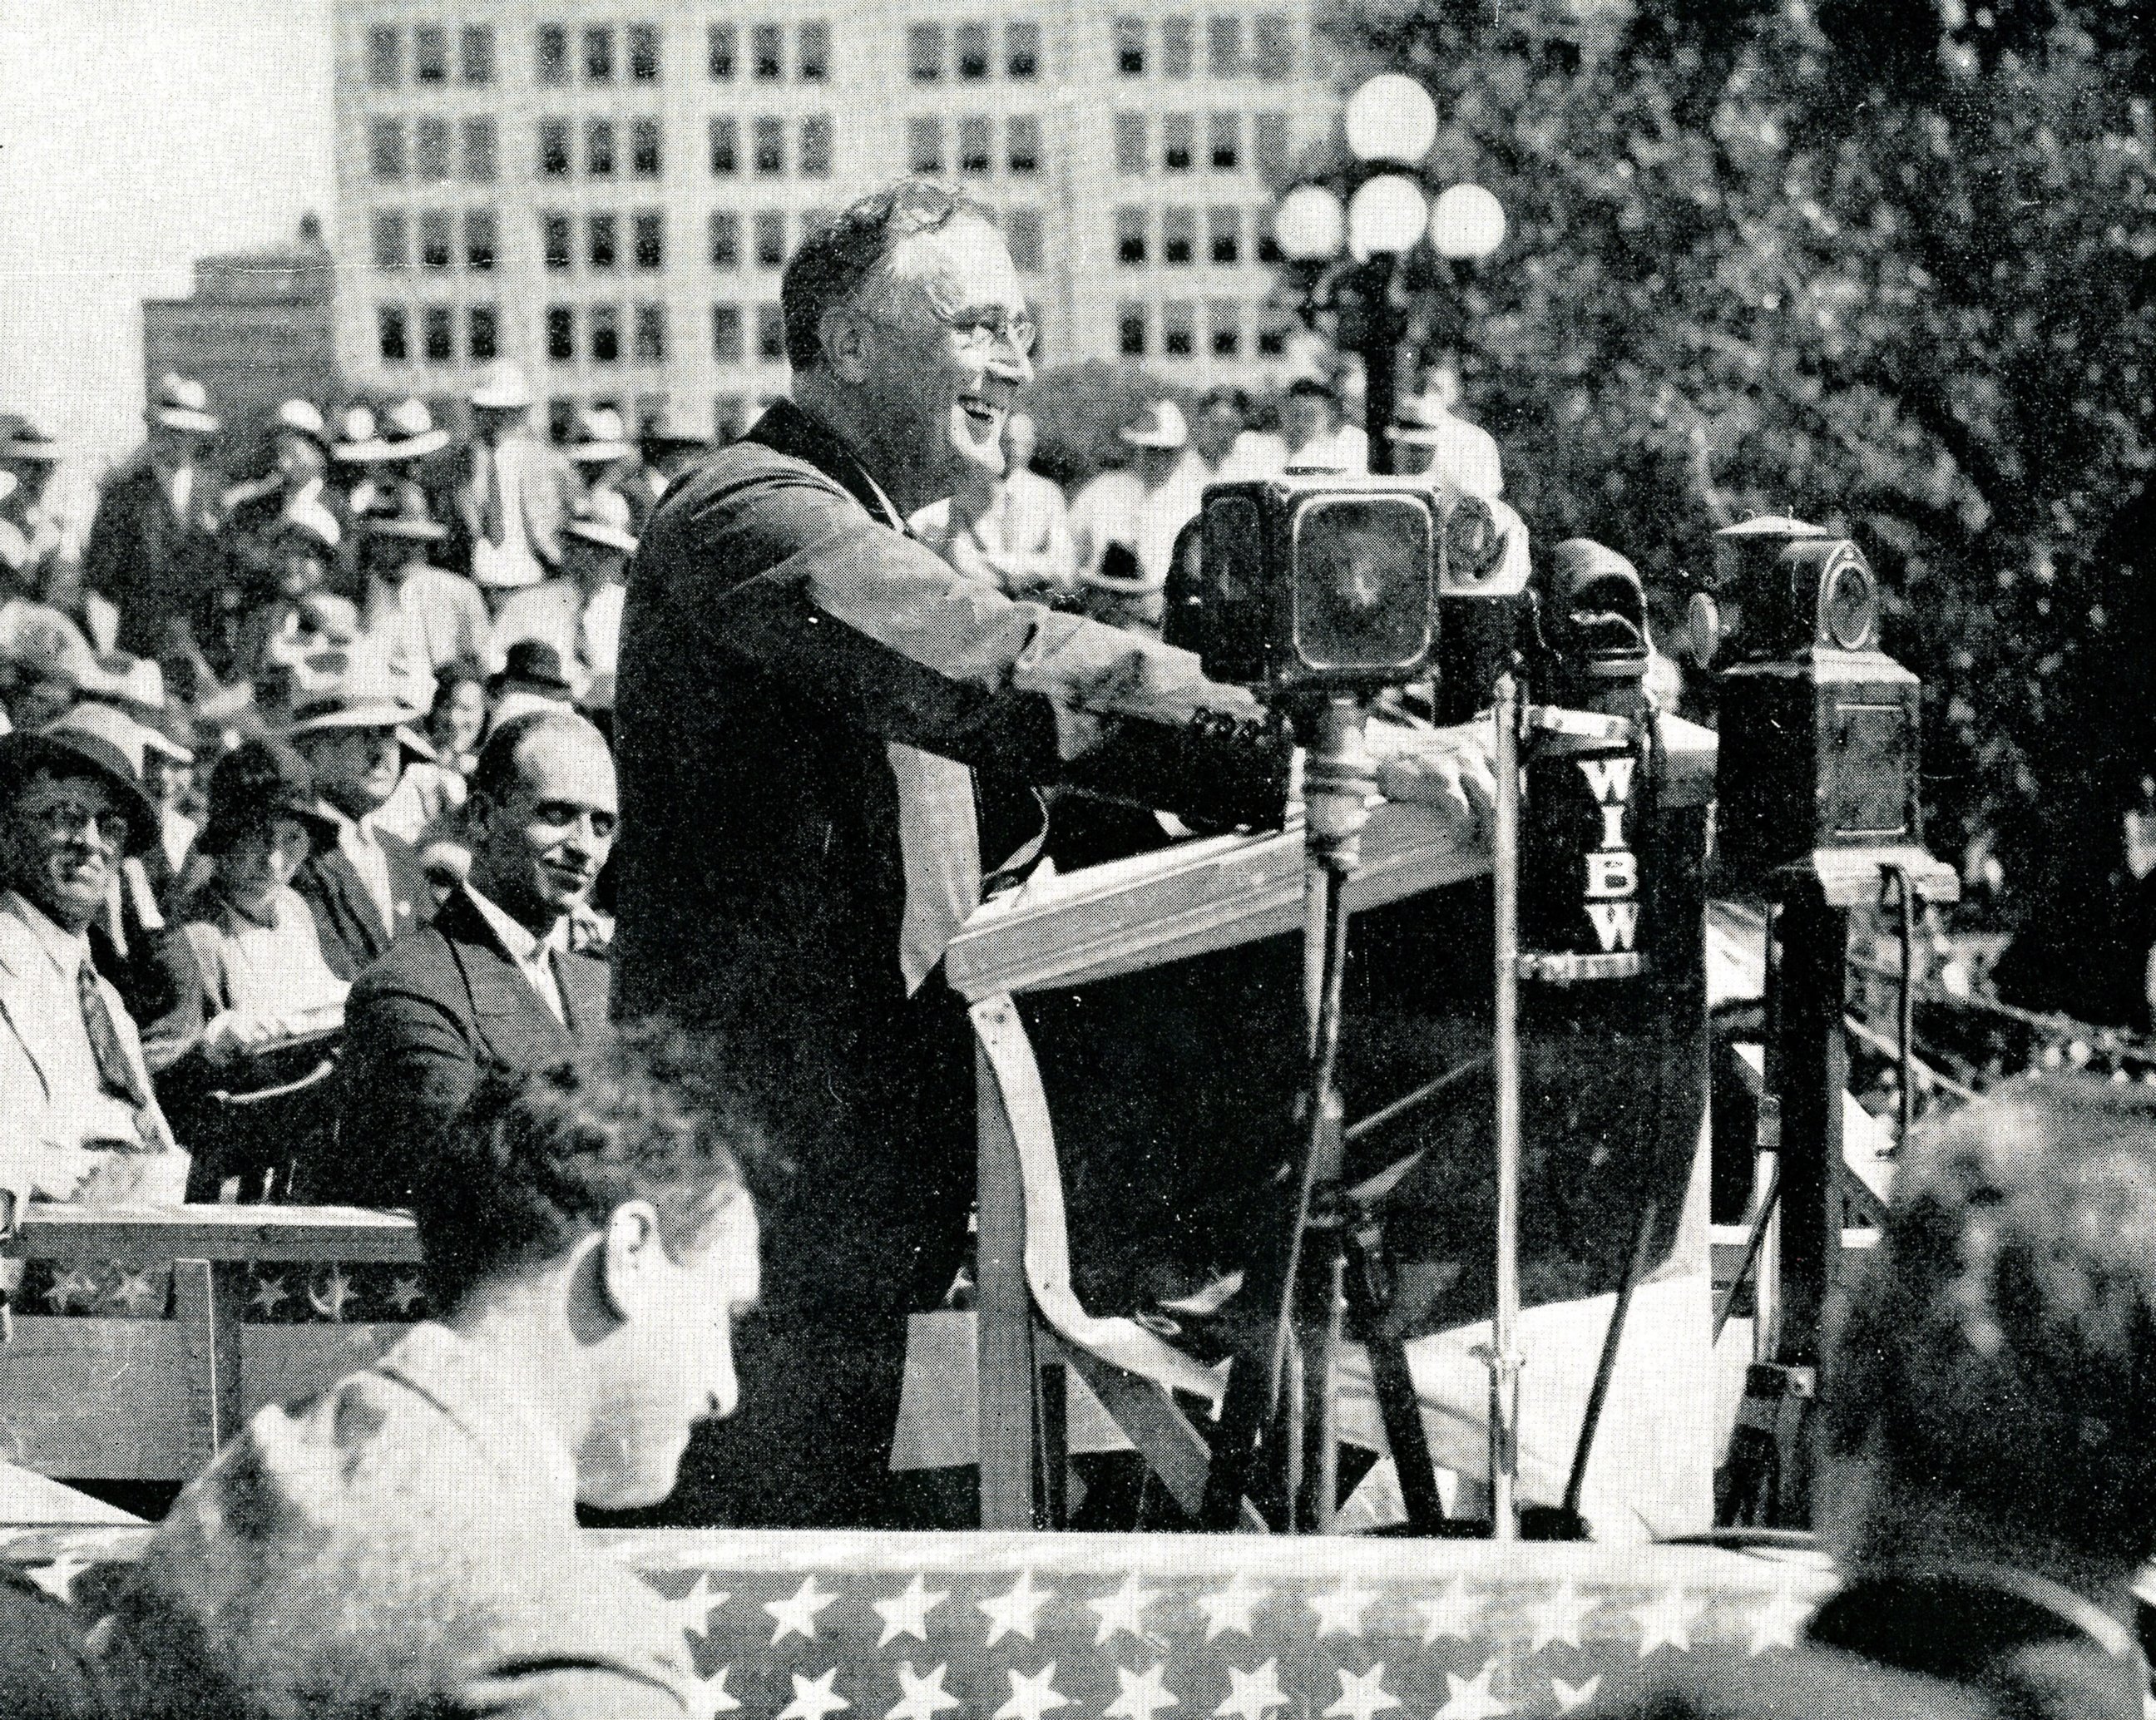 PHOTO: Franklin Delano Roosevelt in Topeka, Kansas on the 1932 campaign trail.